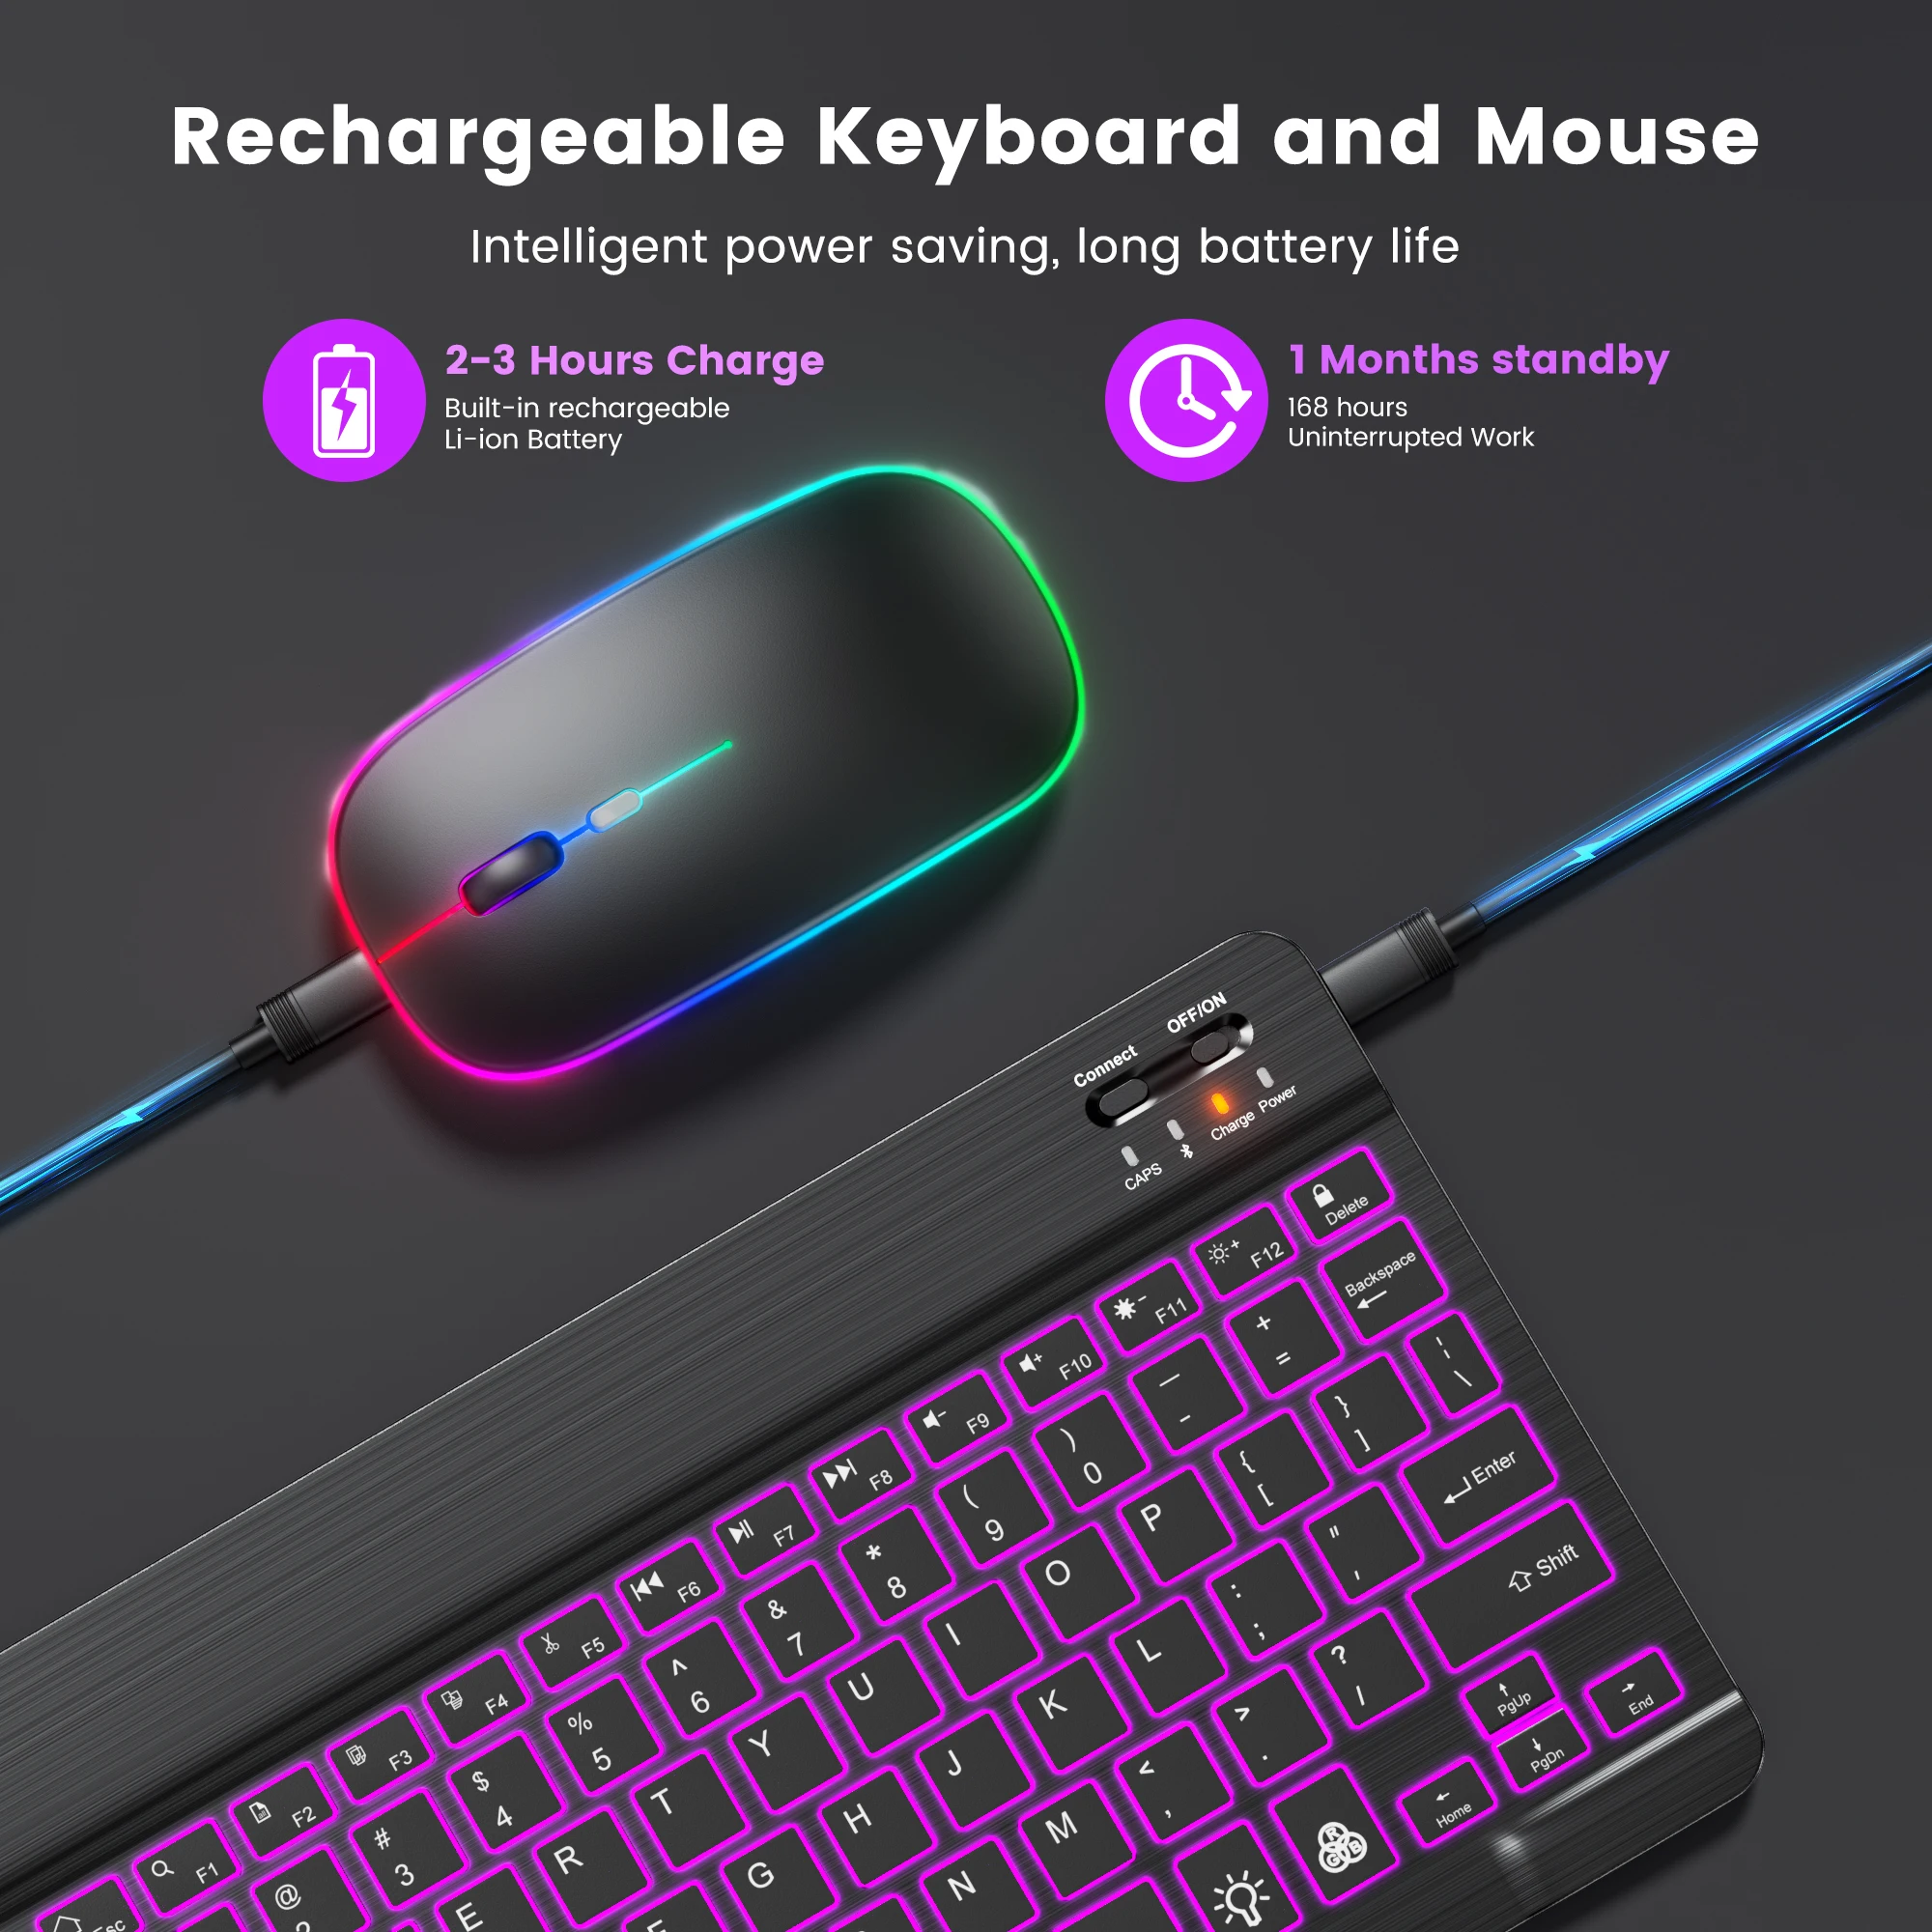 Bluetooth Wireless Keyboard and Mouse Mini Spanish Keyboard with Ñ Rechargeable Rgb Backlit Keyboard Kit for Table Ipad Pro Mac